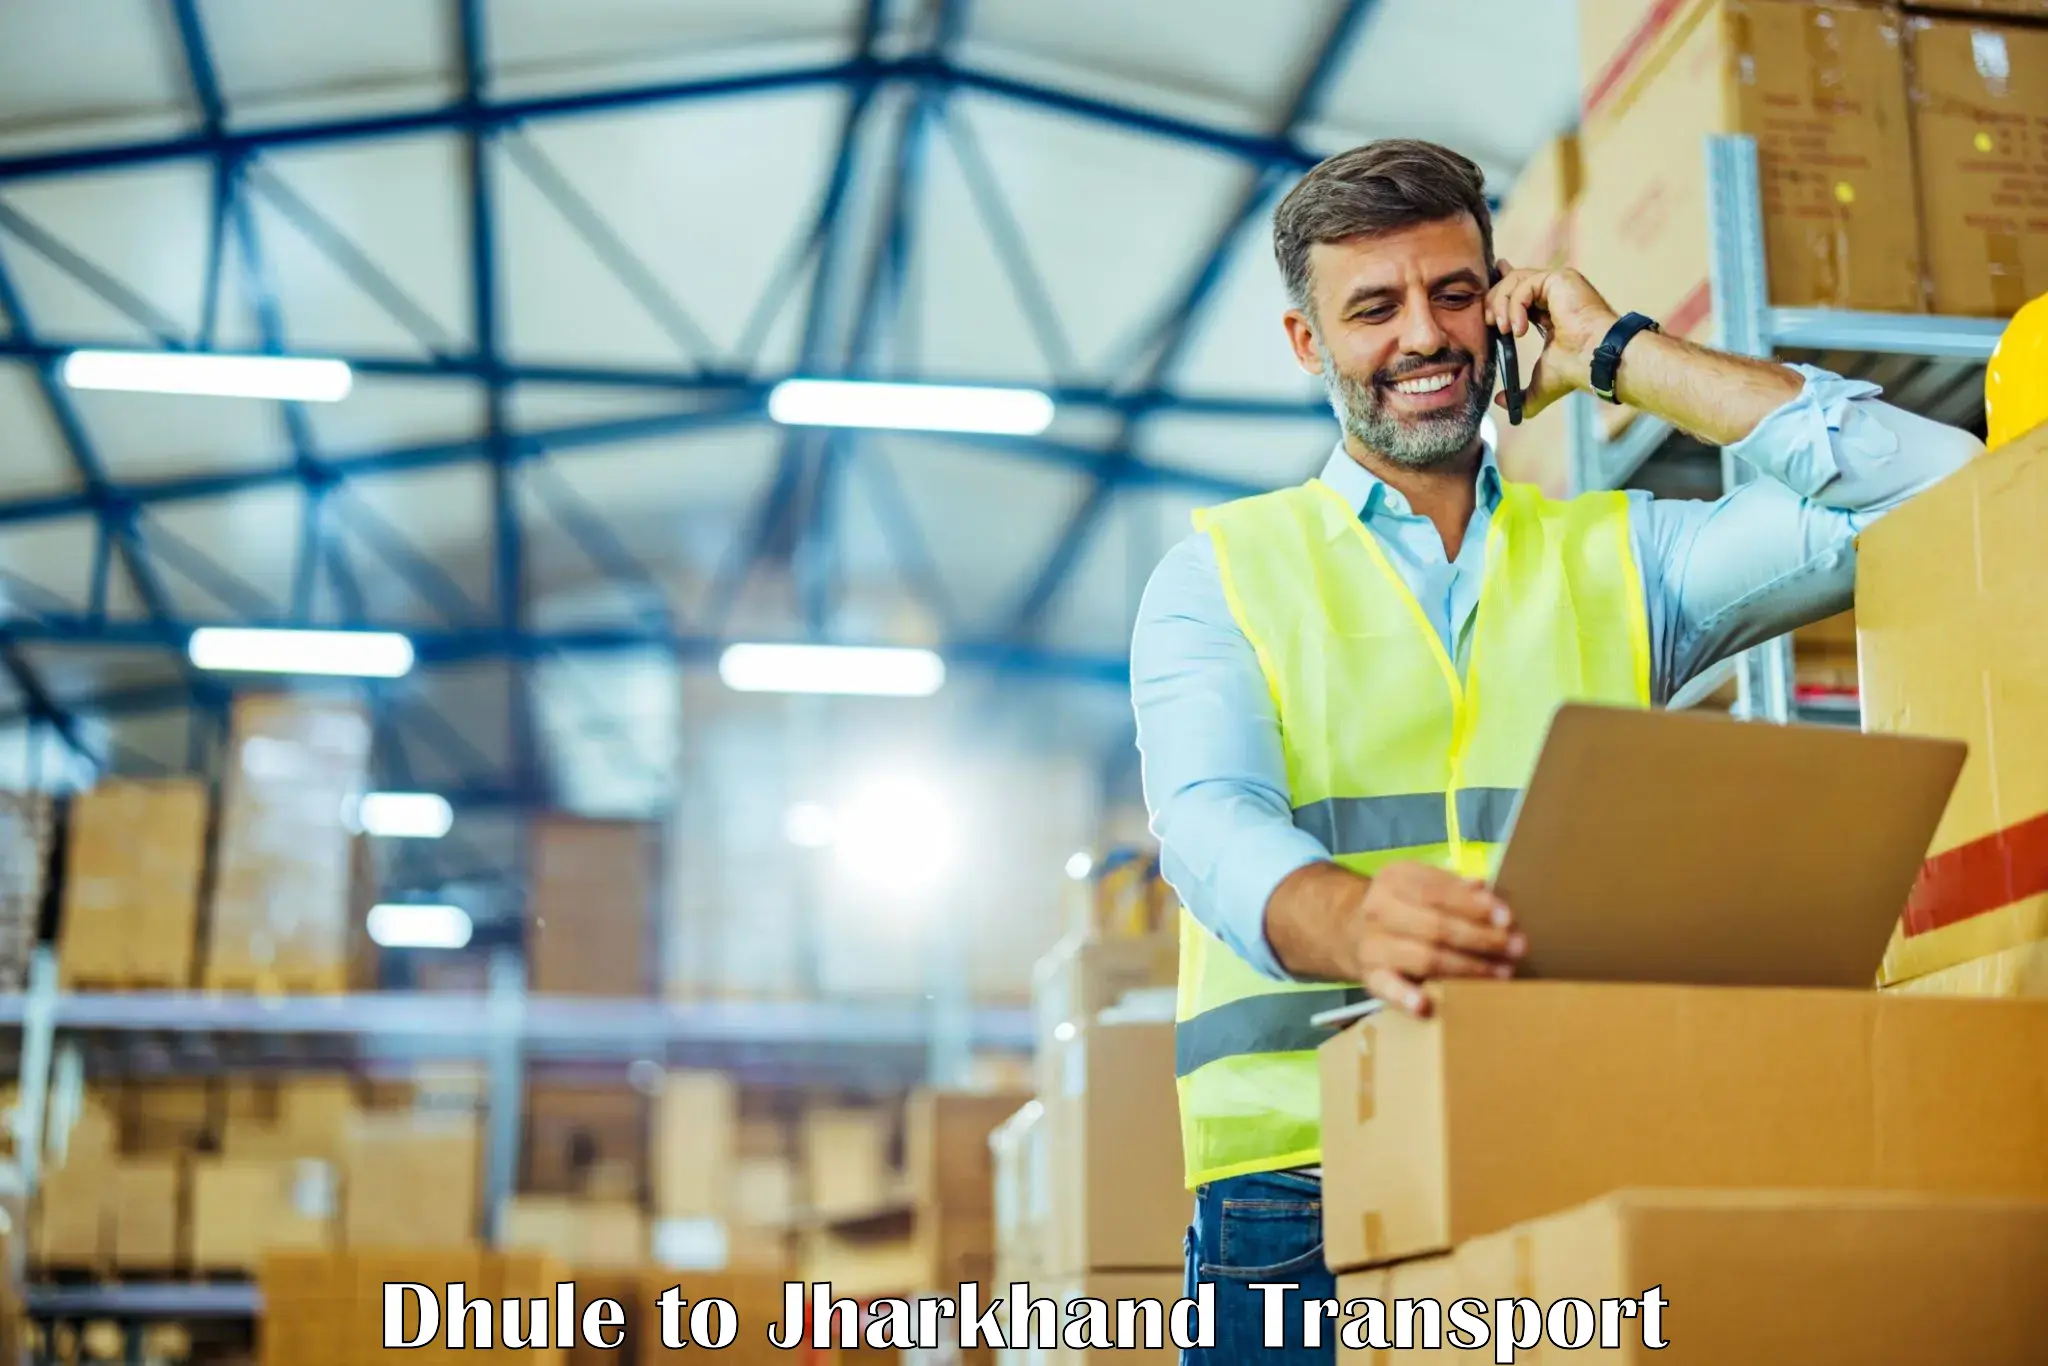 Parcel transport services Dhule to Chandwa